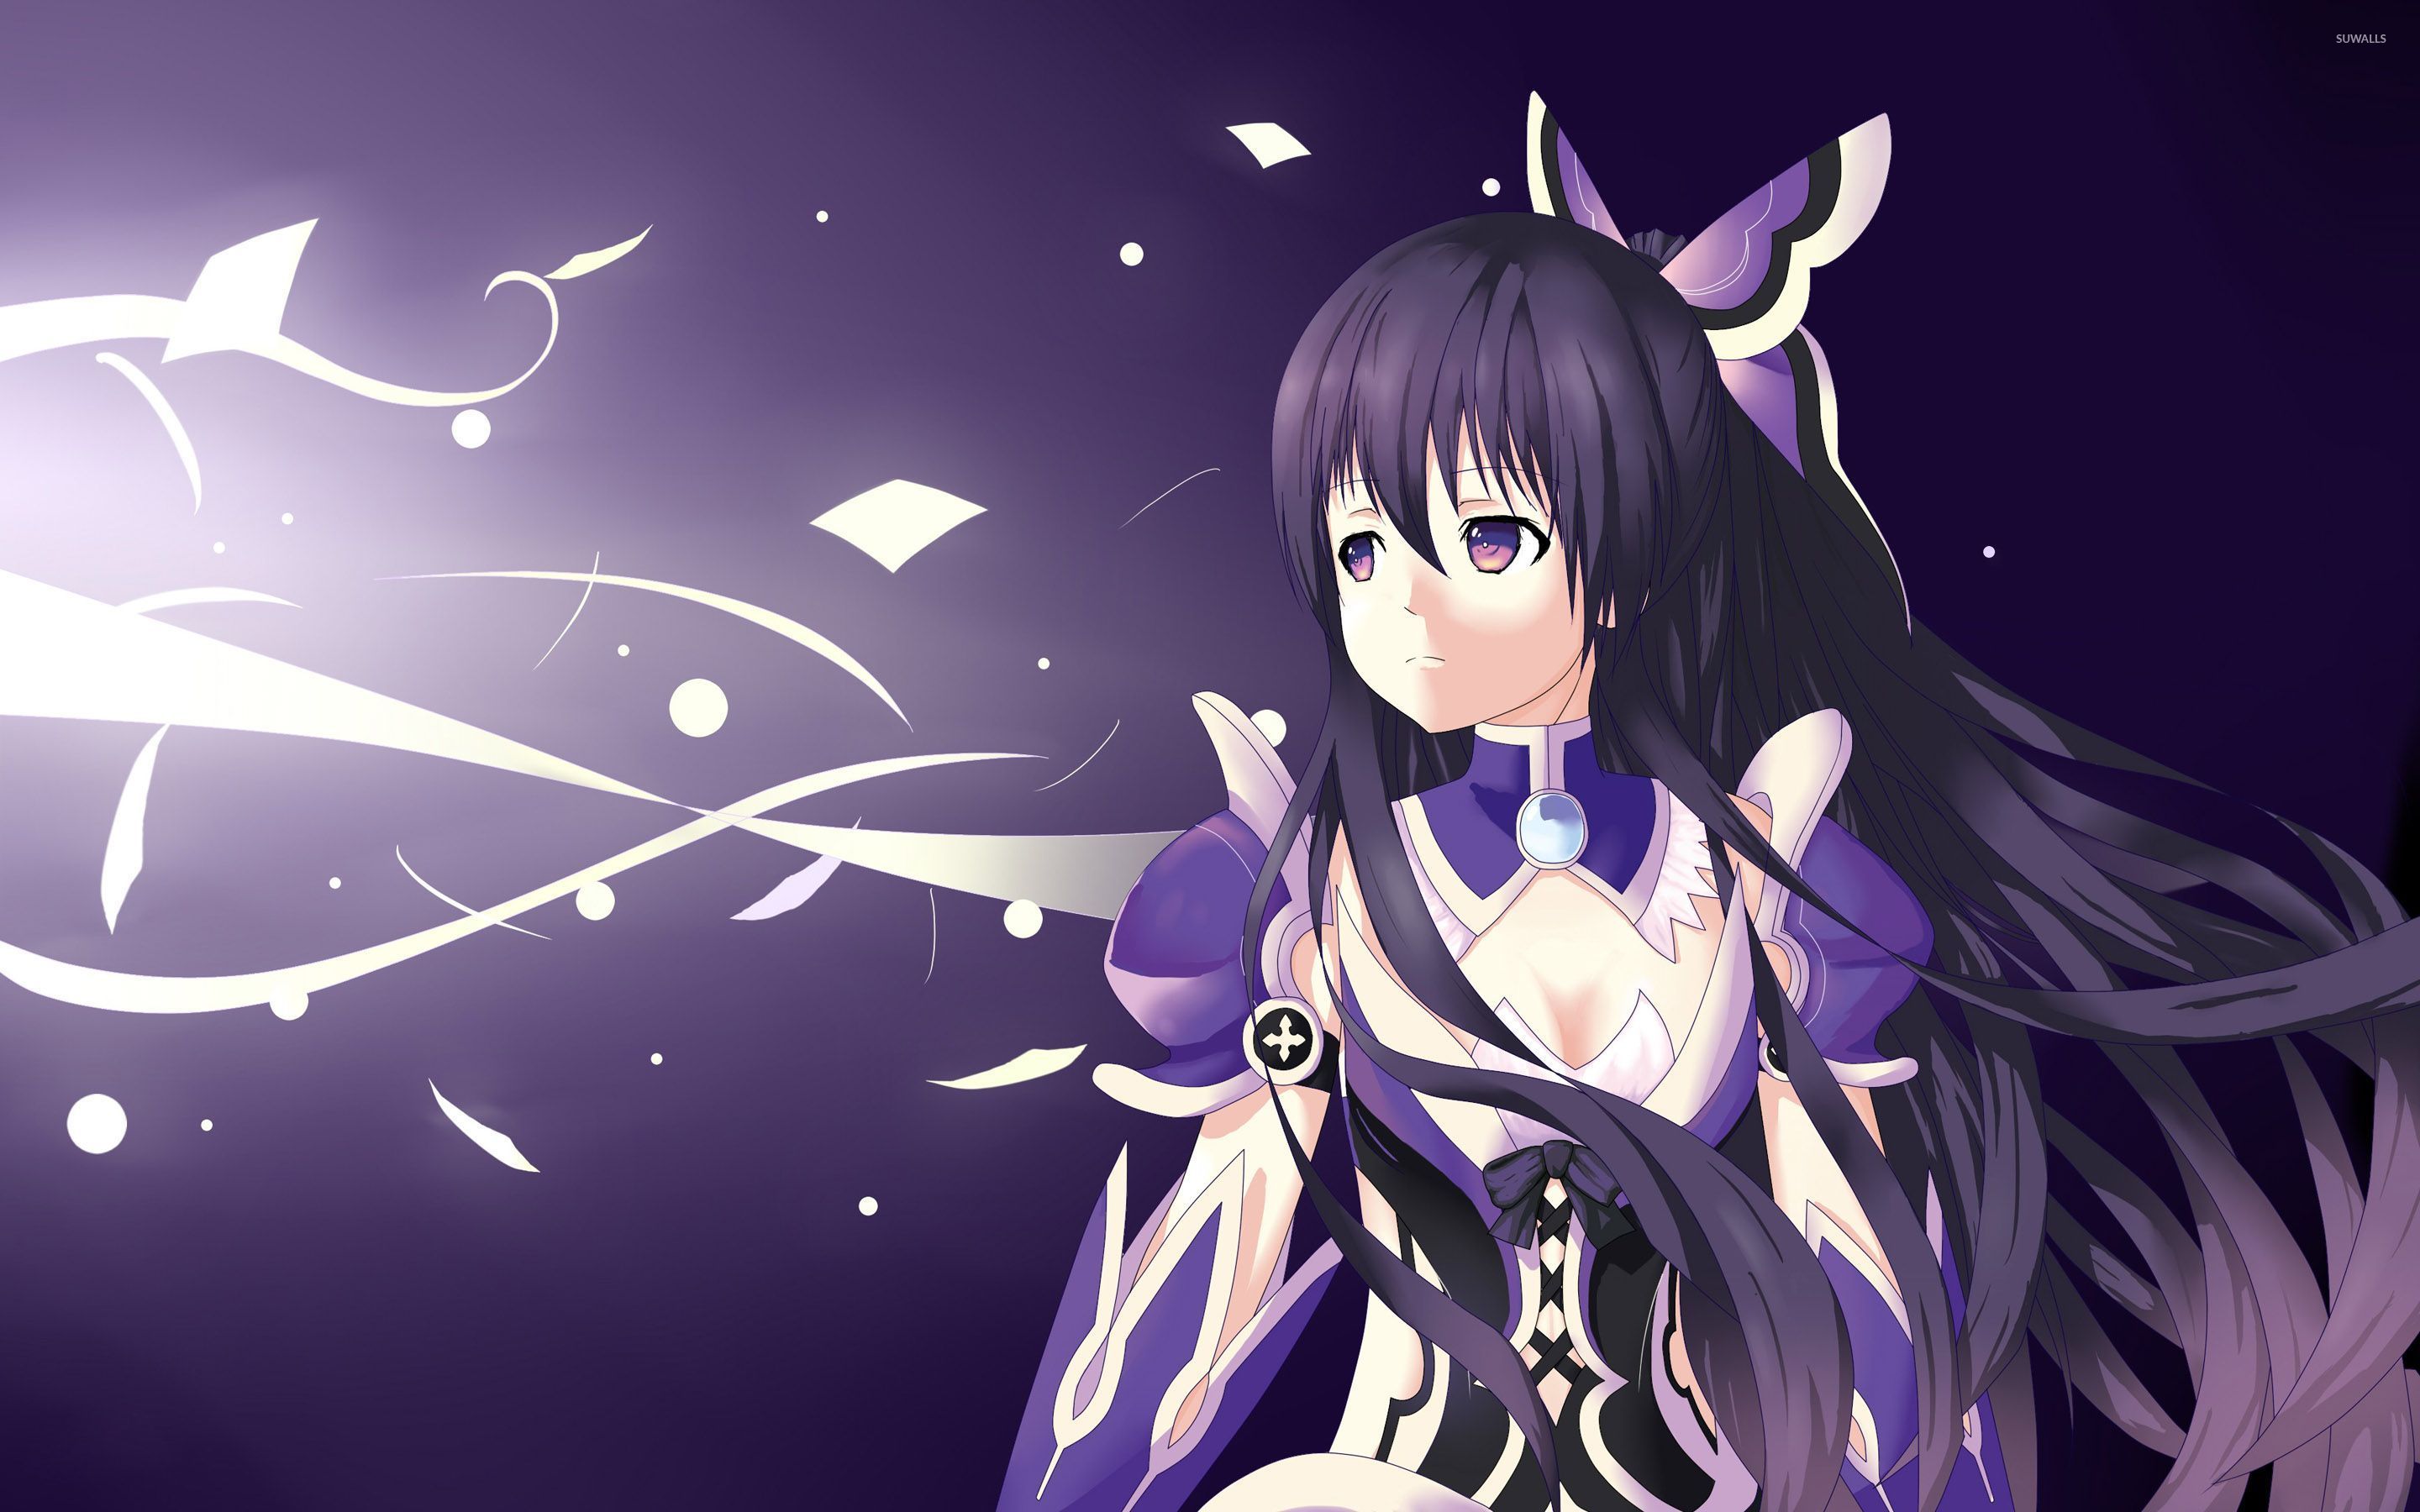 anime wallpaper date a live